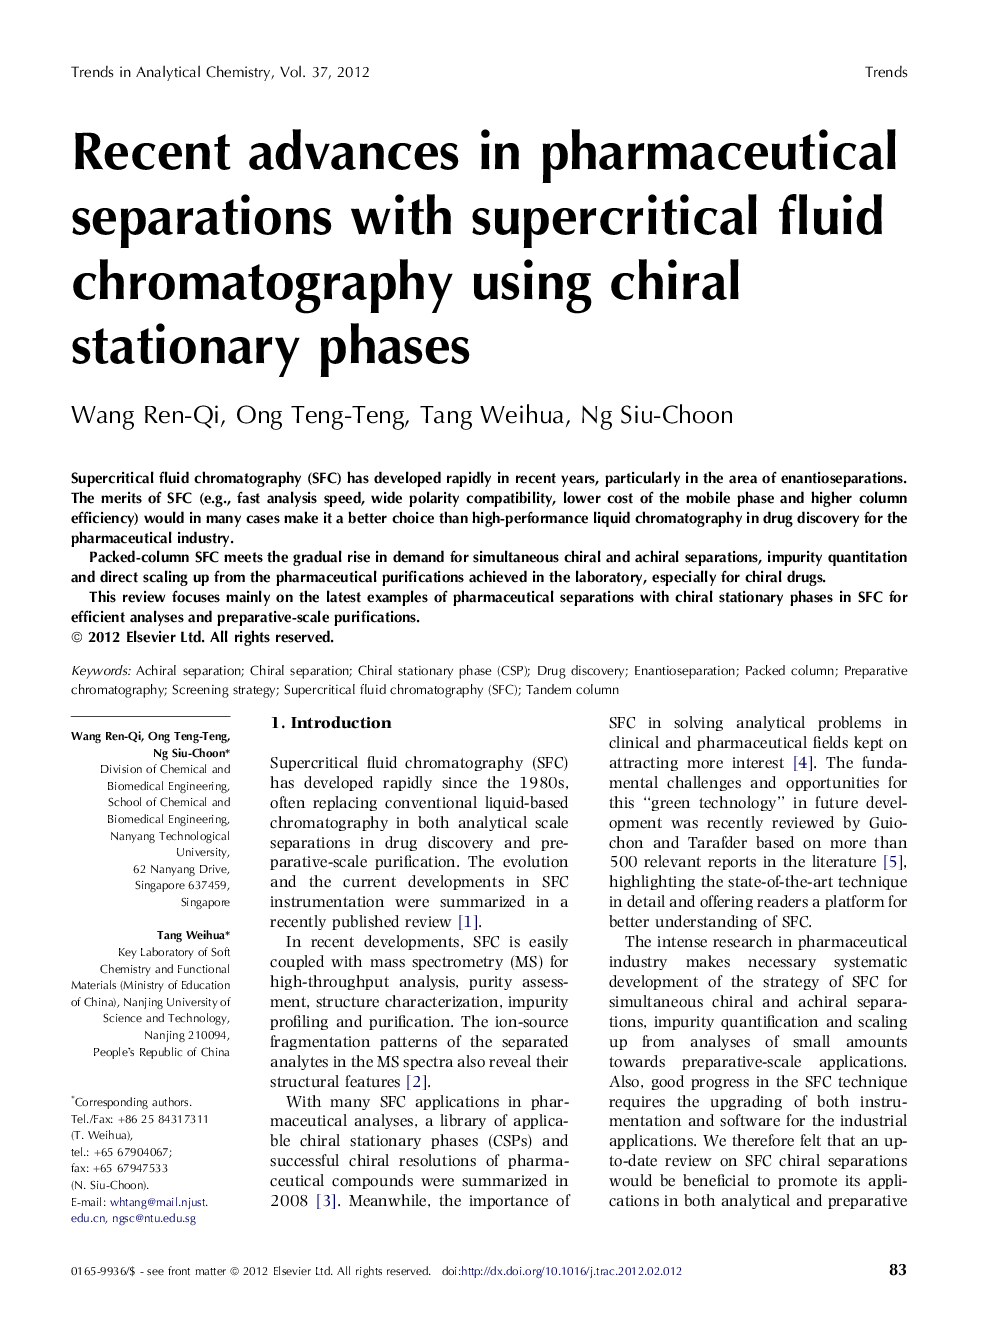 Recent advances in pharmaceutical separations with supercritical fluid chromatography using chiral stationary phases